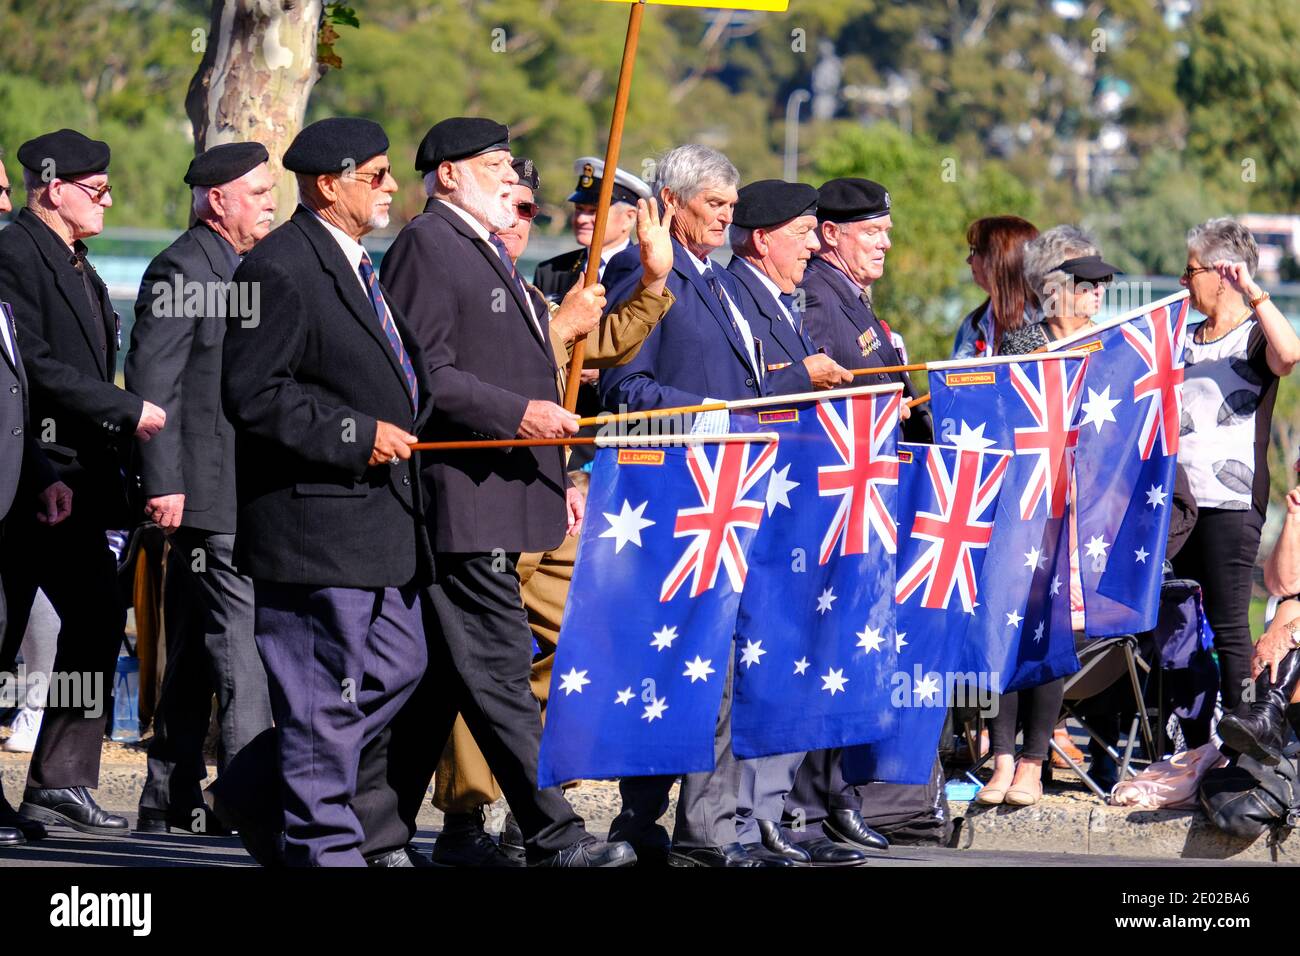 Veterans marching during Anzac Day commemorations in Adelaide Australia Stock Photo